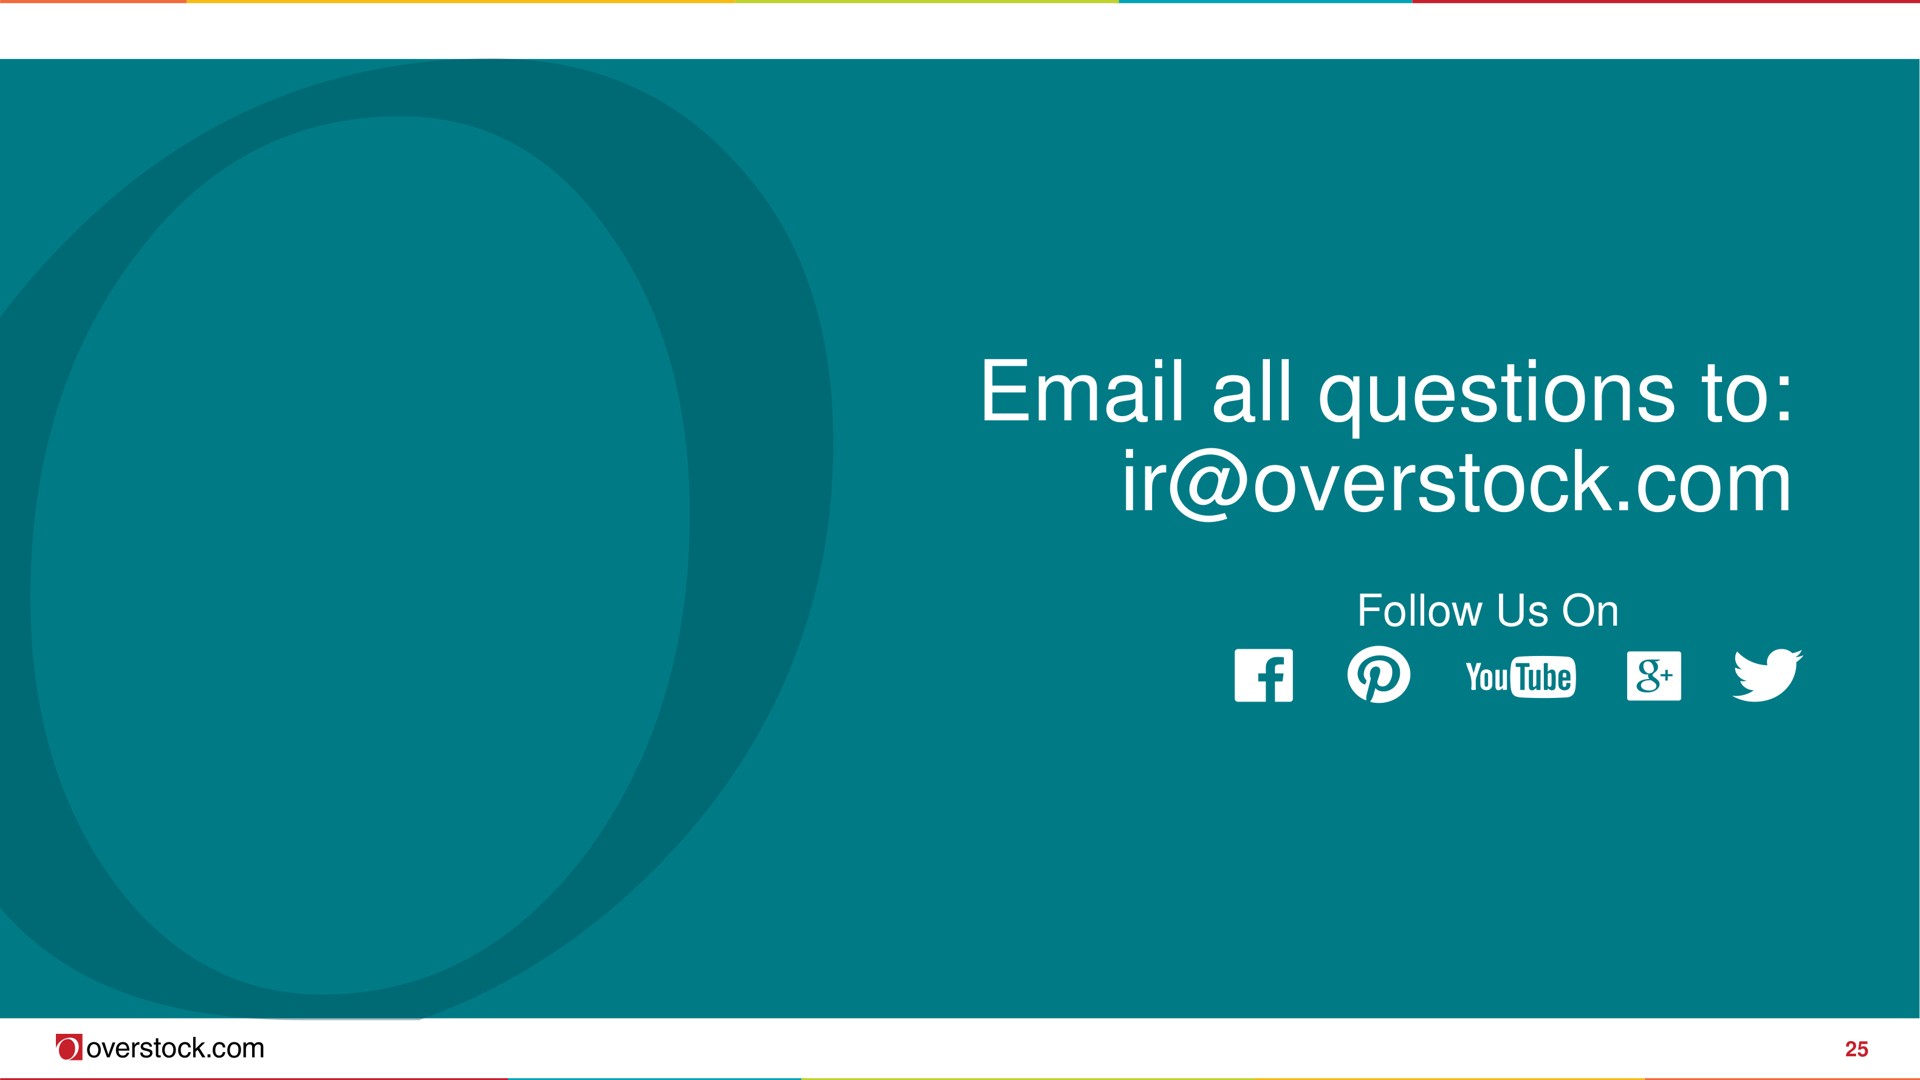 all questions to overstock we | Overstock